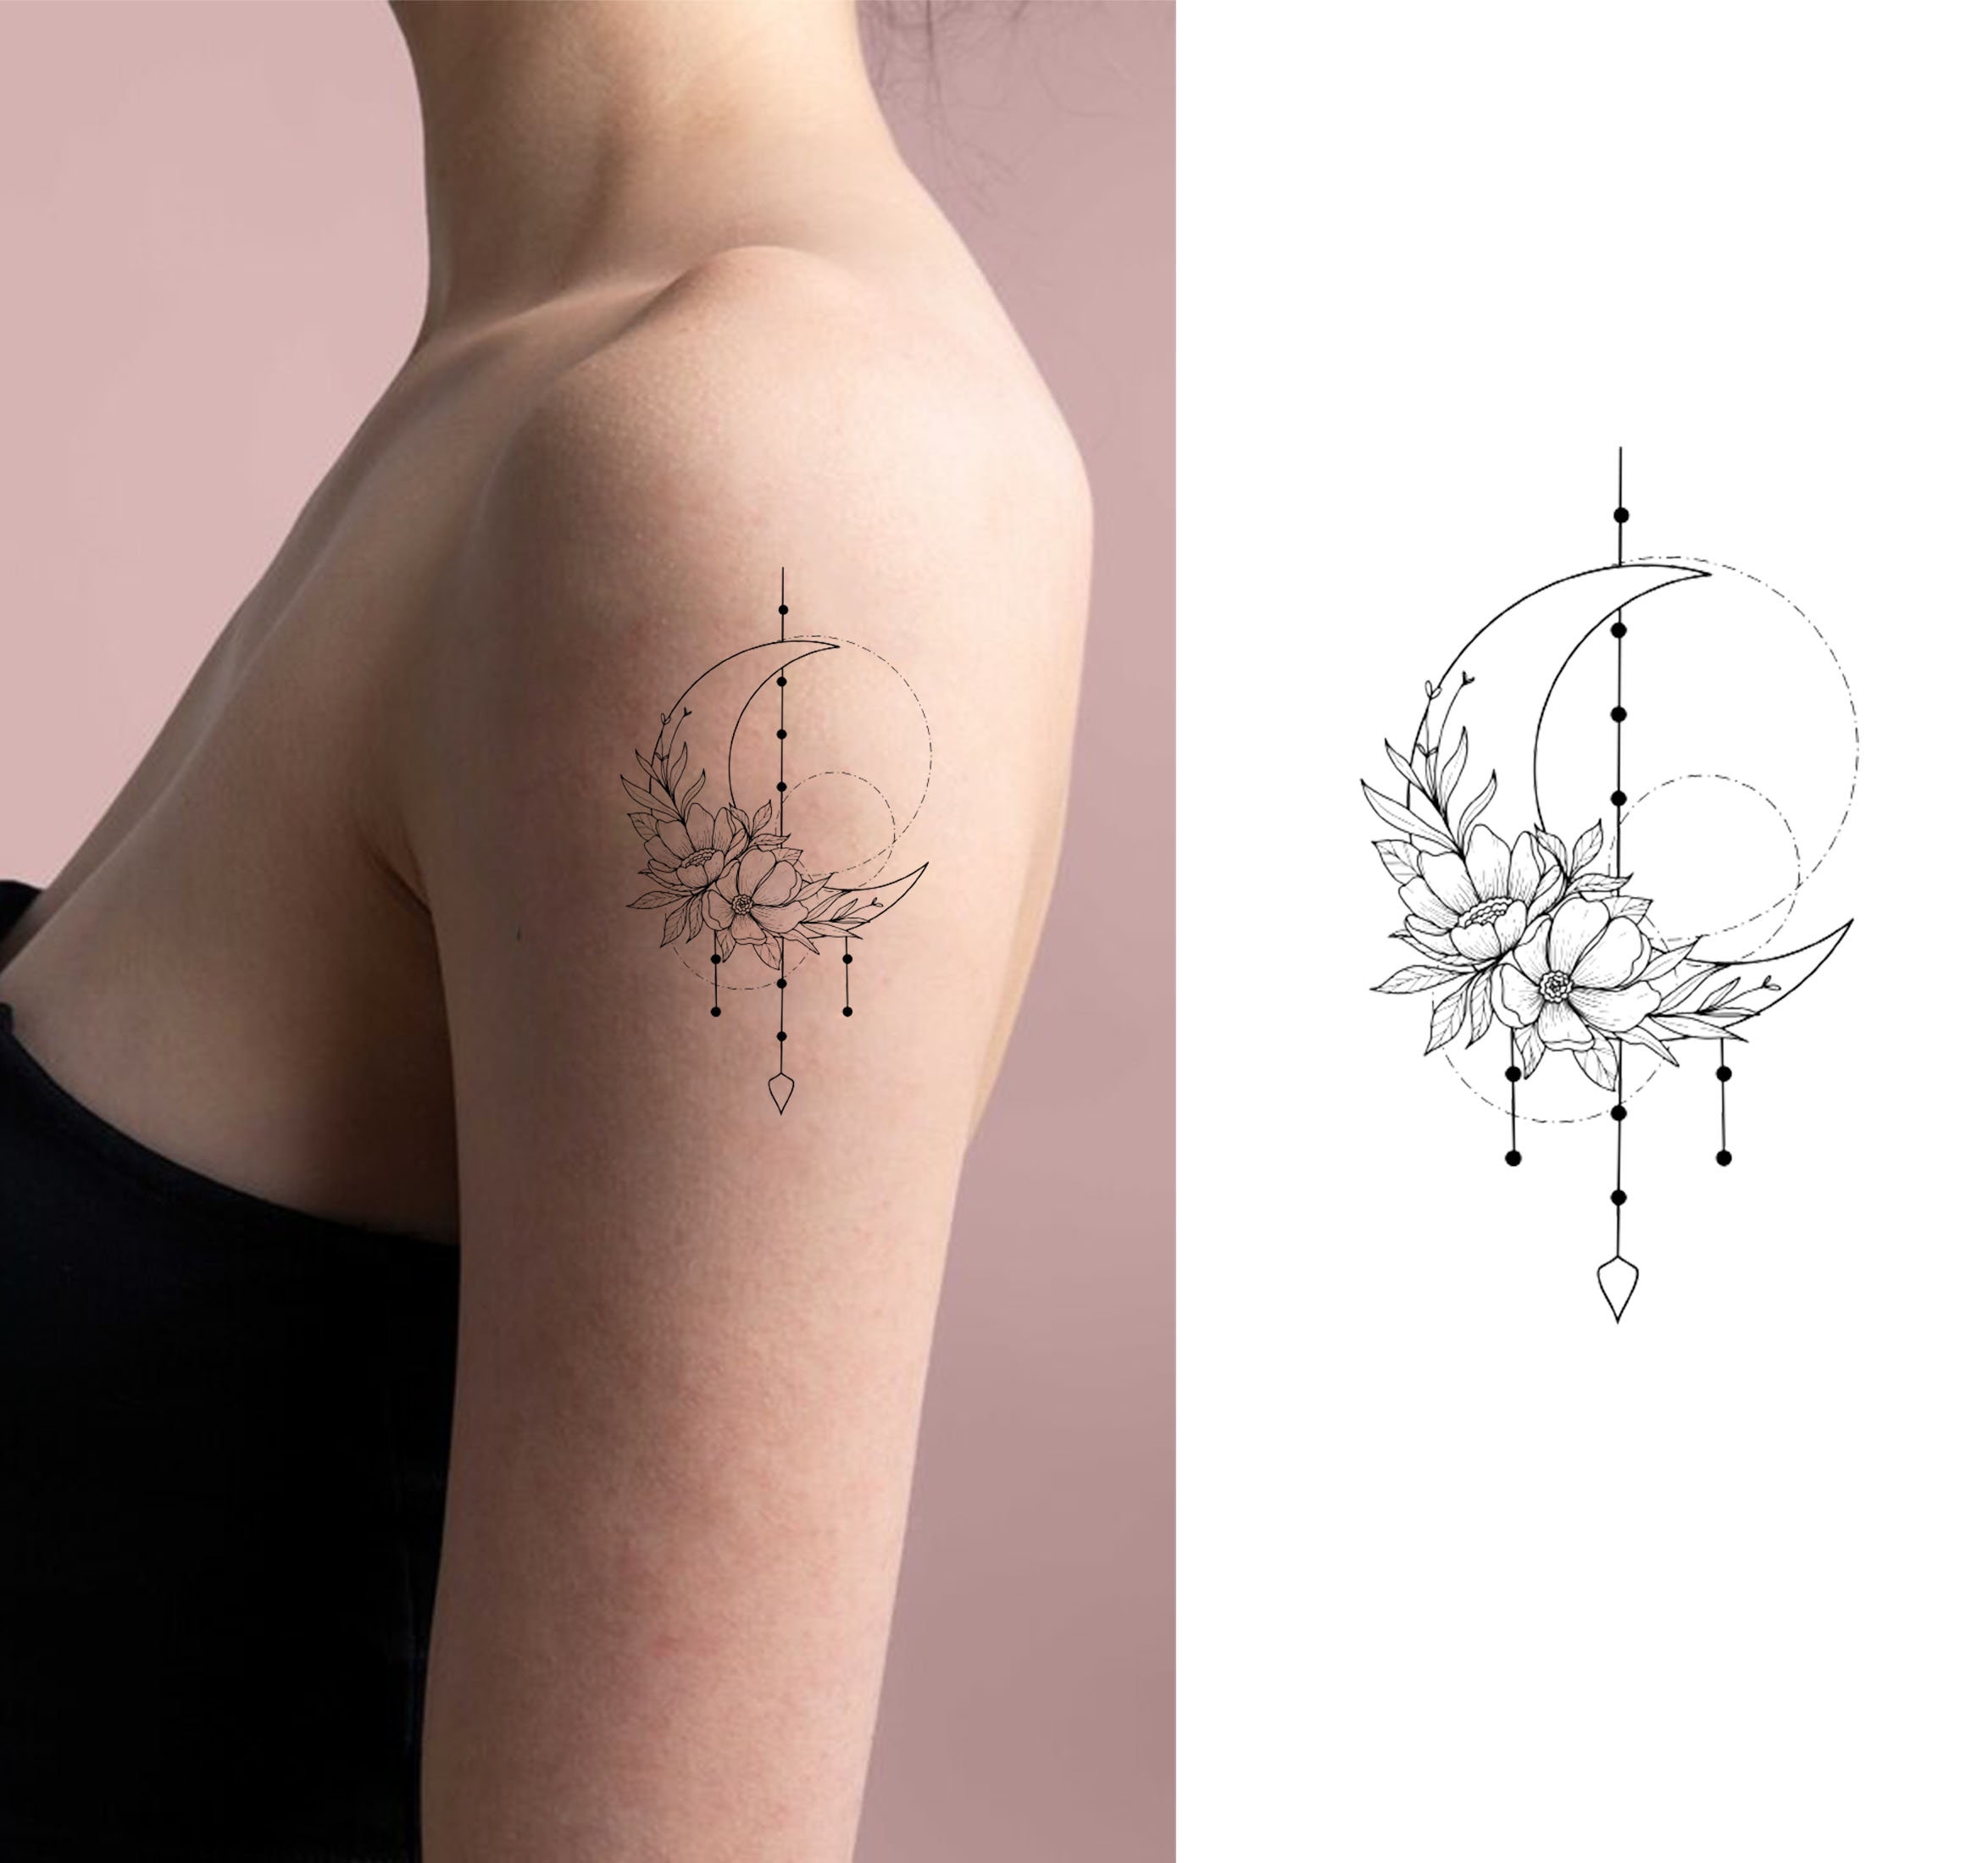 Tattoo tagged with: small, astronomy, little, playground, tiny, galaxy,  ifttt, minimalist, inner forearm | inked-app.com